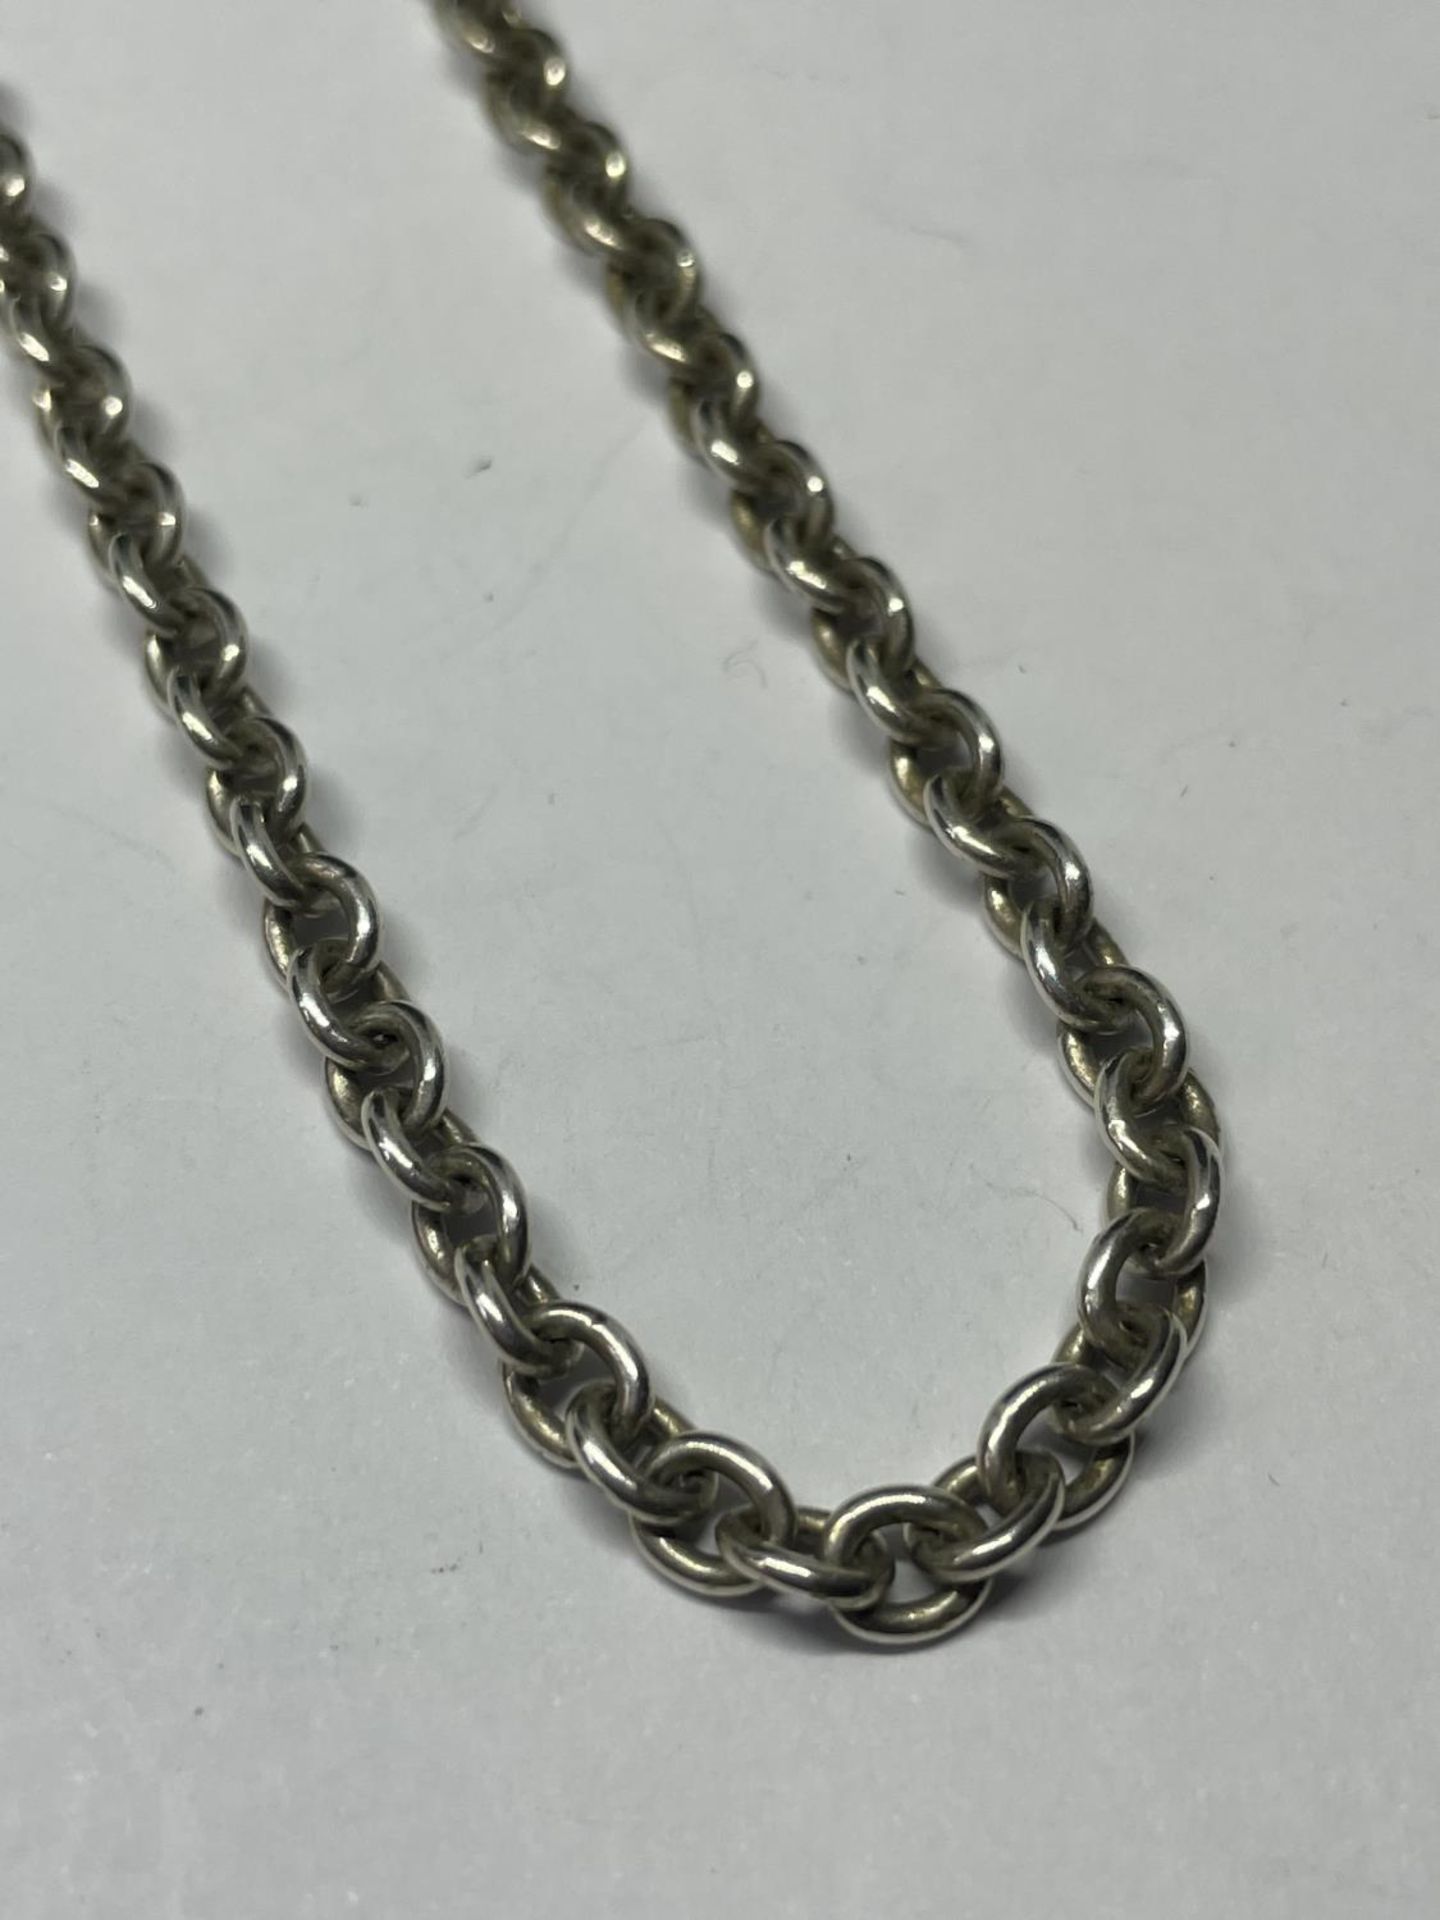 A SILVER NECKLACE LENGTH 18 INCHES - Image 2 of 3